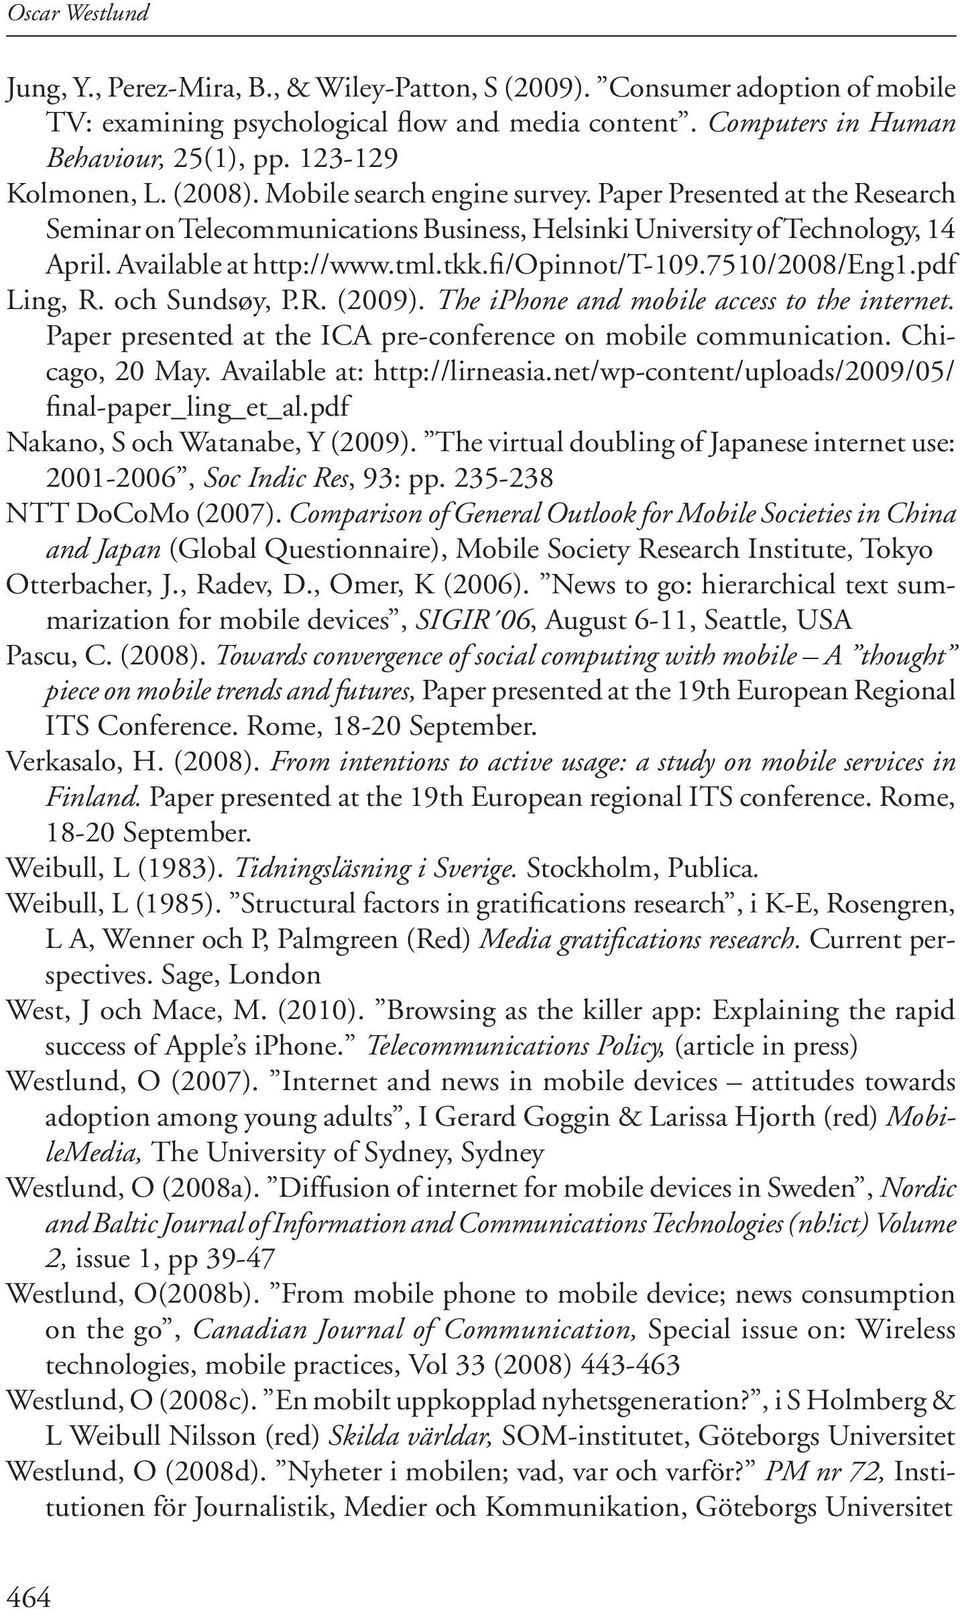 tml.tkk.fi/opinnot/t-109.7510/2008/eng1.pdf Ling, R. och Sundsøy, P.R. (2009). The iphone and mobile access to the internet. Paper presented at the ICA pre-conference on mobile communication.